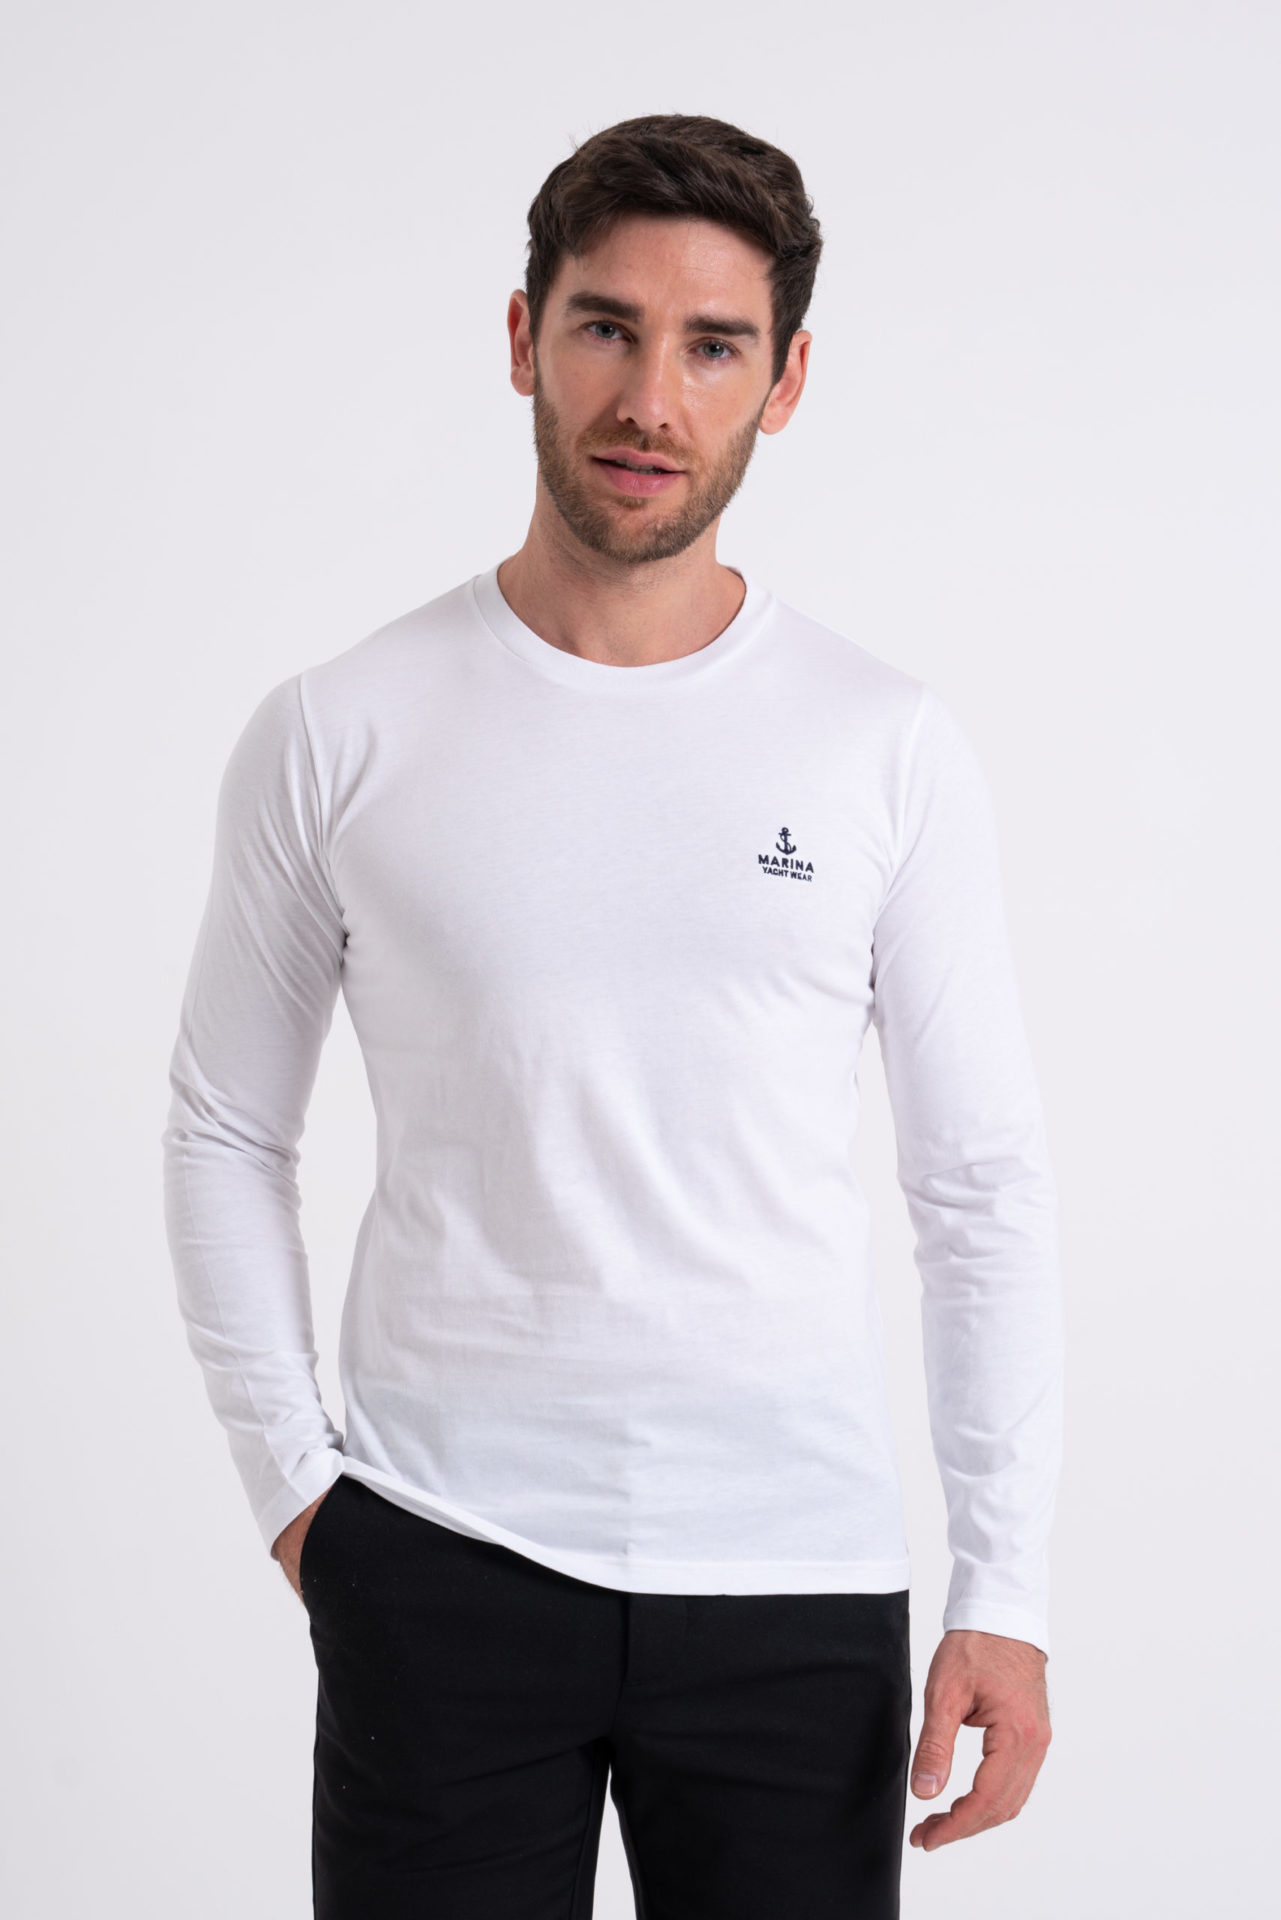 Mens Long Sleeve T-shirt for yacht crew